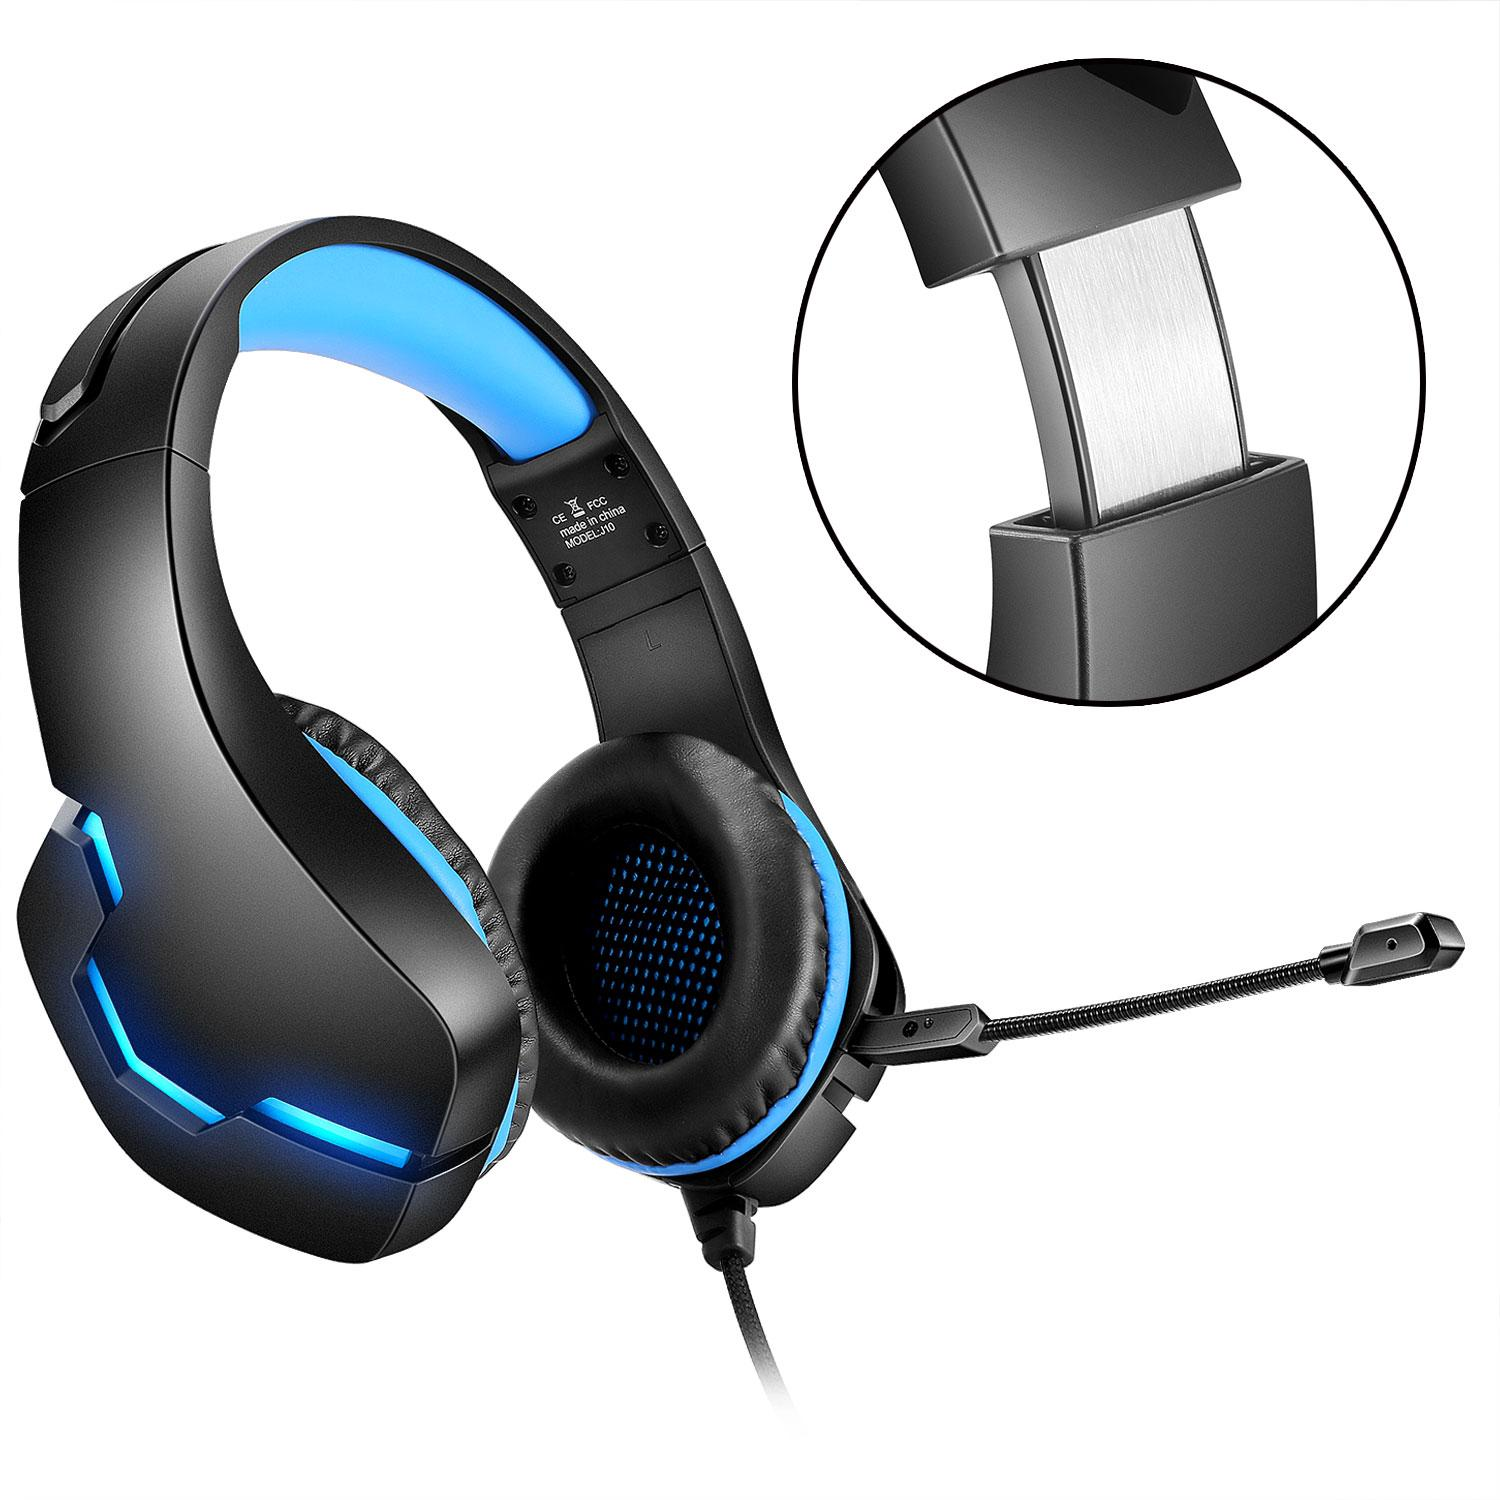 INF Gaming-Headset mit 3,5 mm - Over-ear Schwarz/Blau Headset Gaming Klinkenstecker Schwarz/Blau